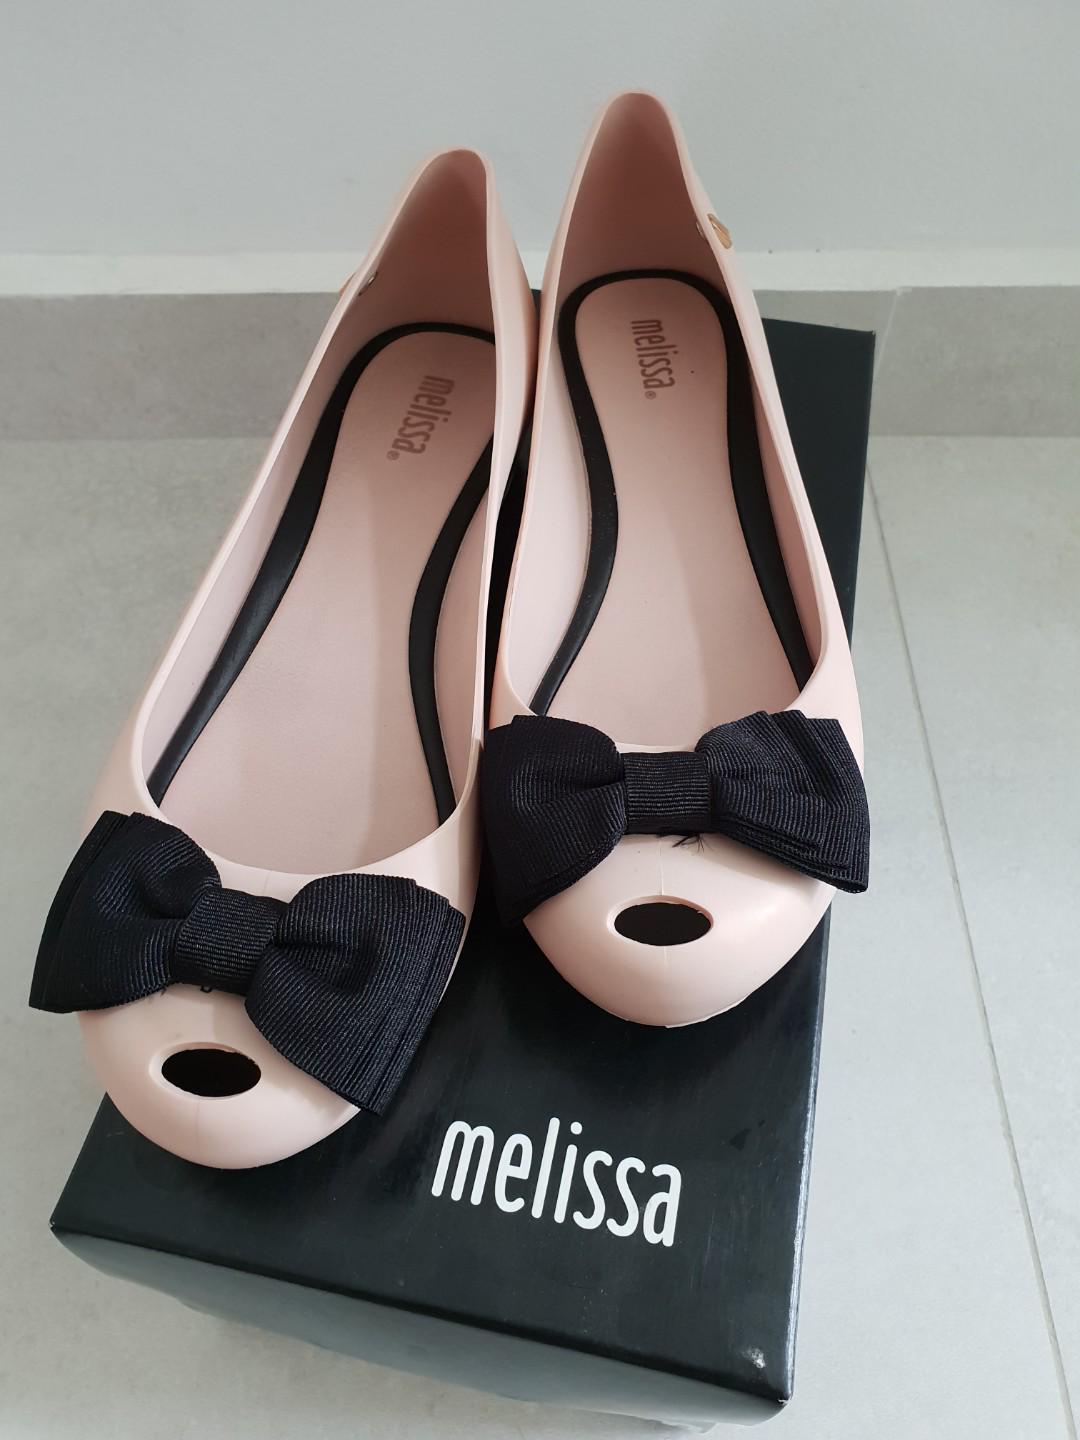 melissa shoes orchard